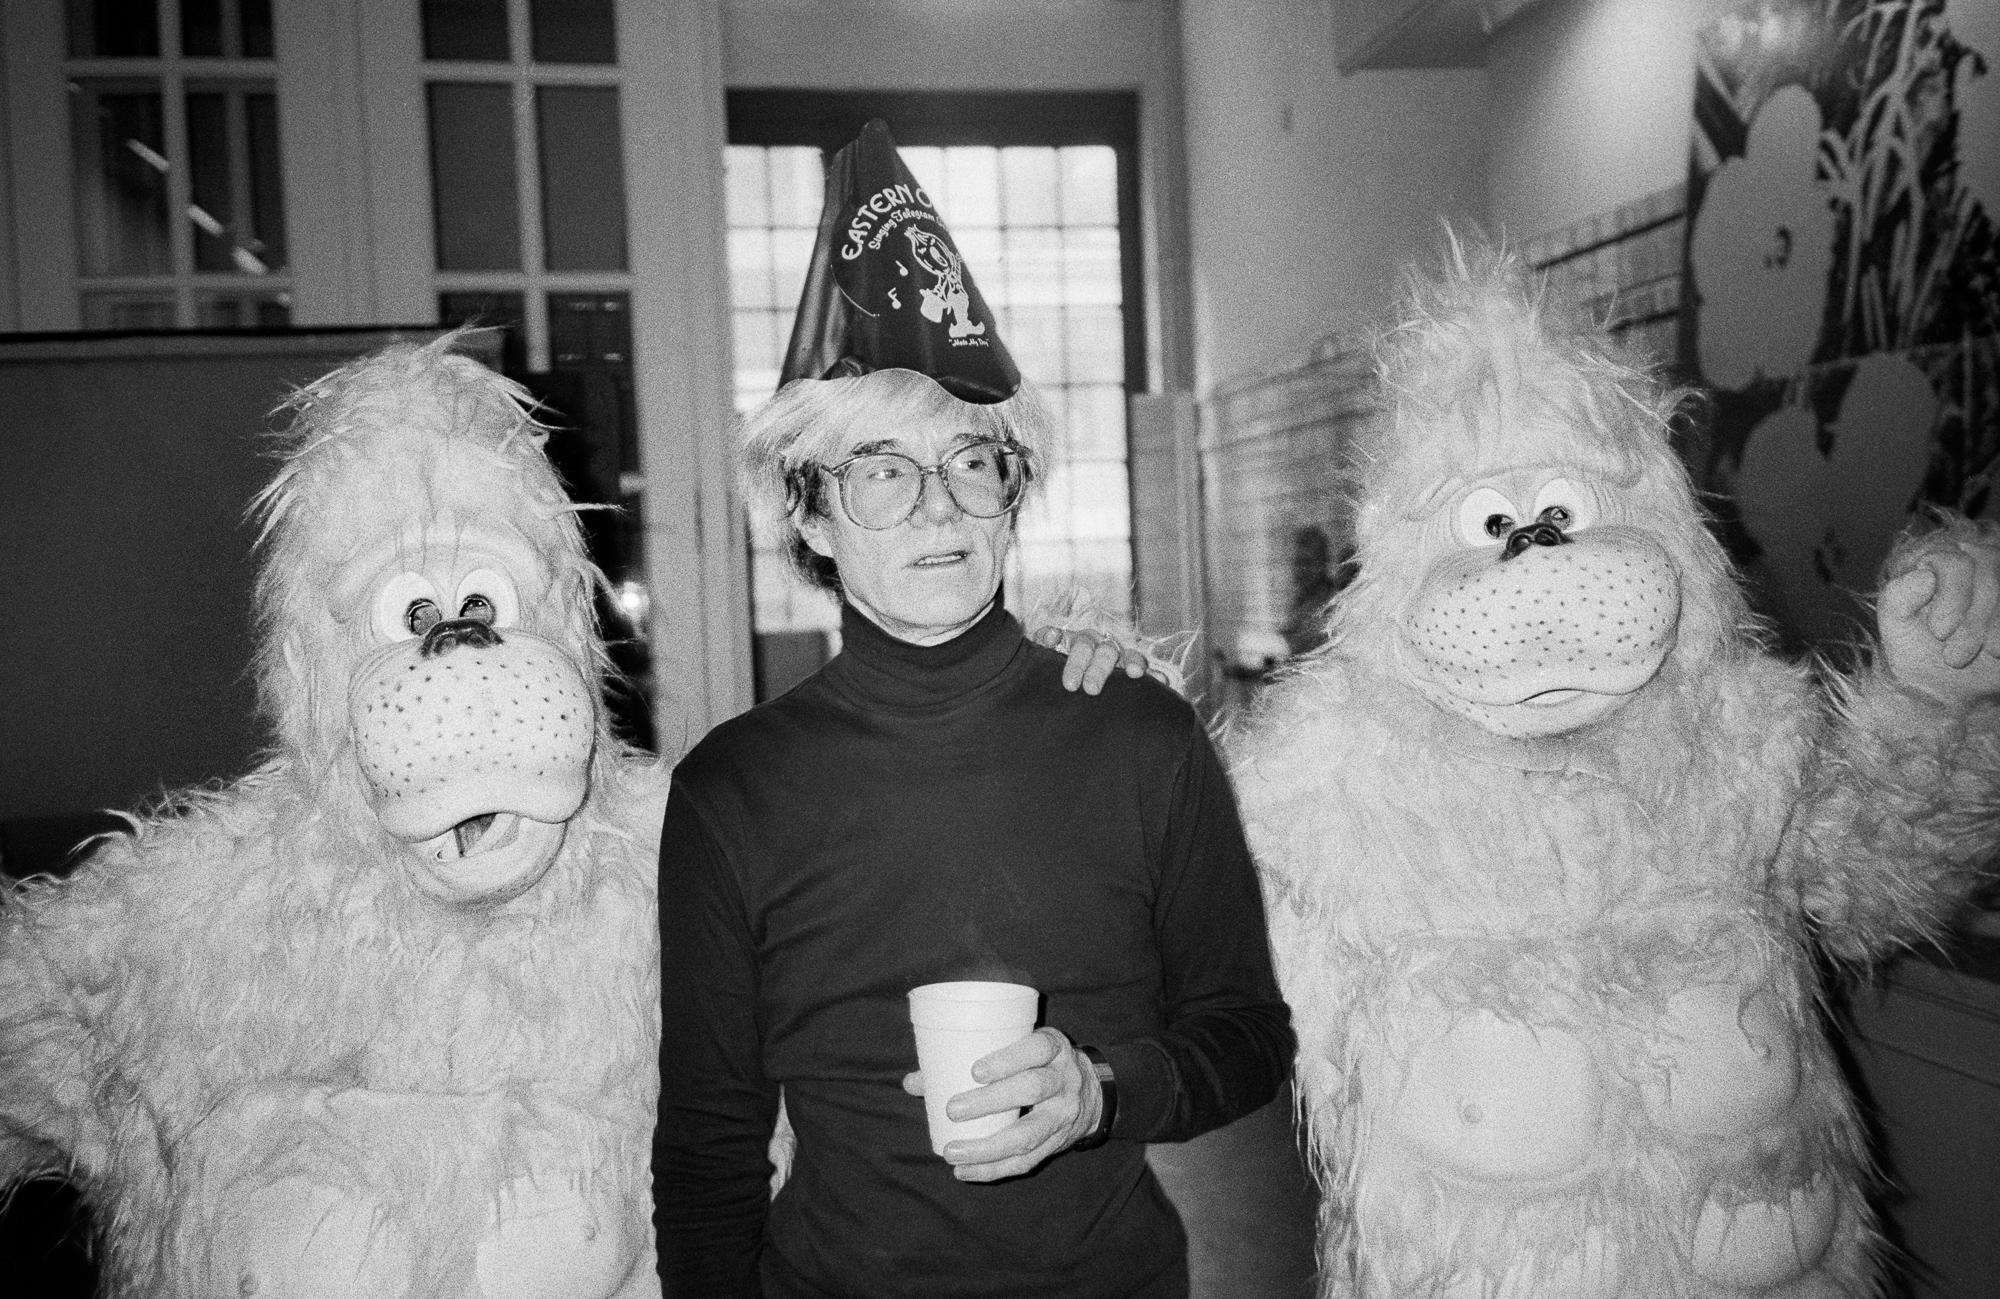  Andy Warhol’s birthday with pink orangutans the designer Halston sent over to surprise him for his birthday. (1985) 